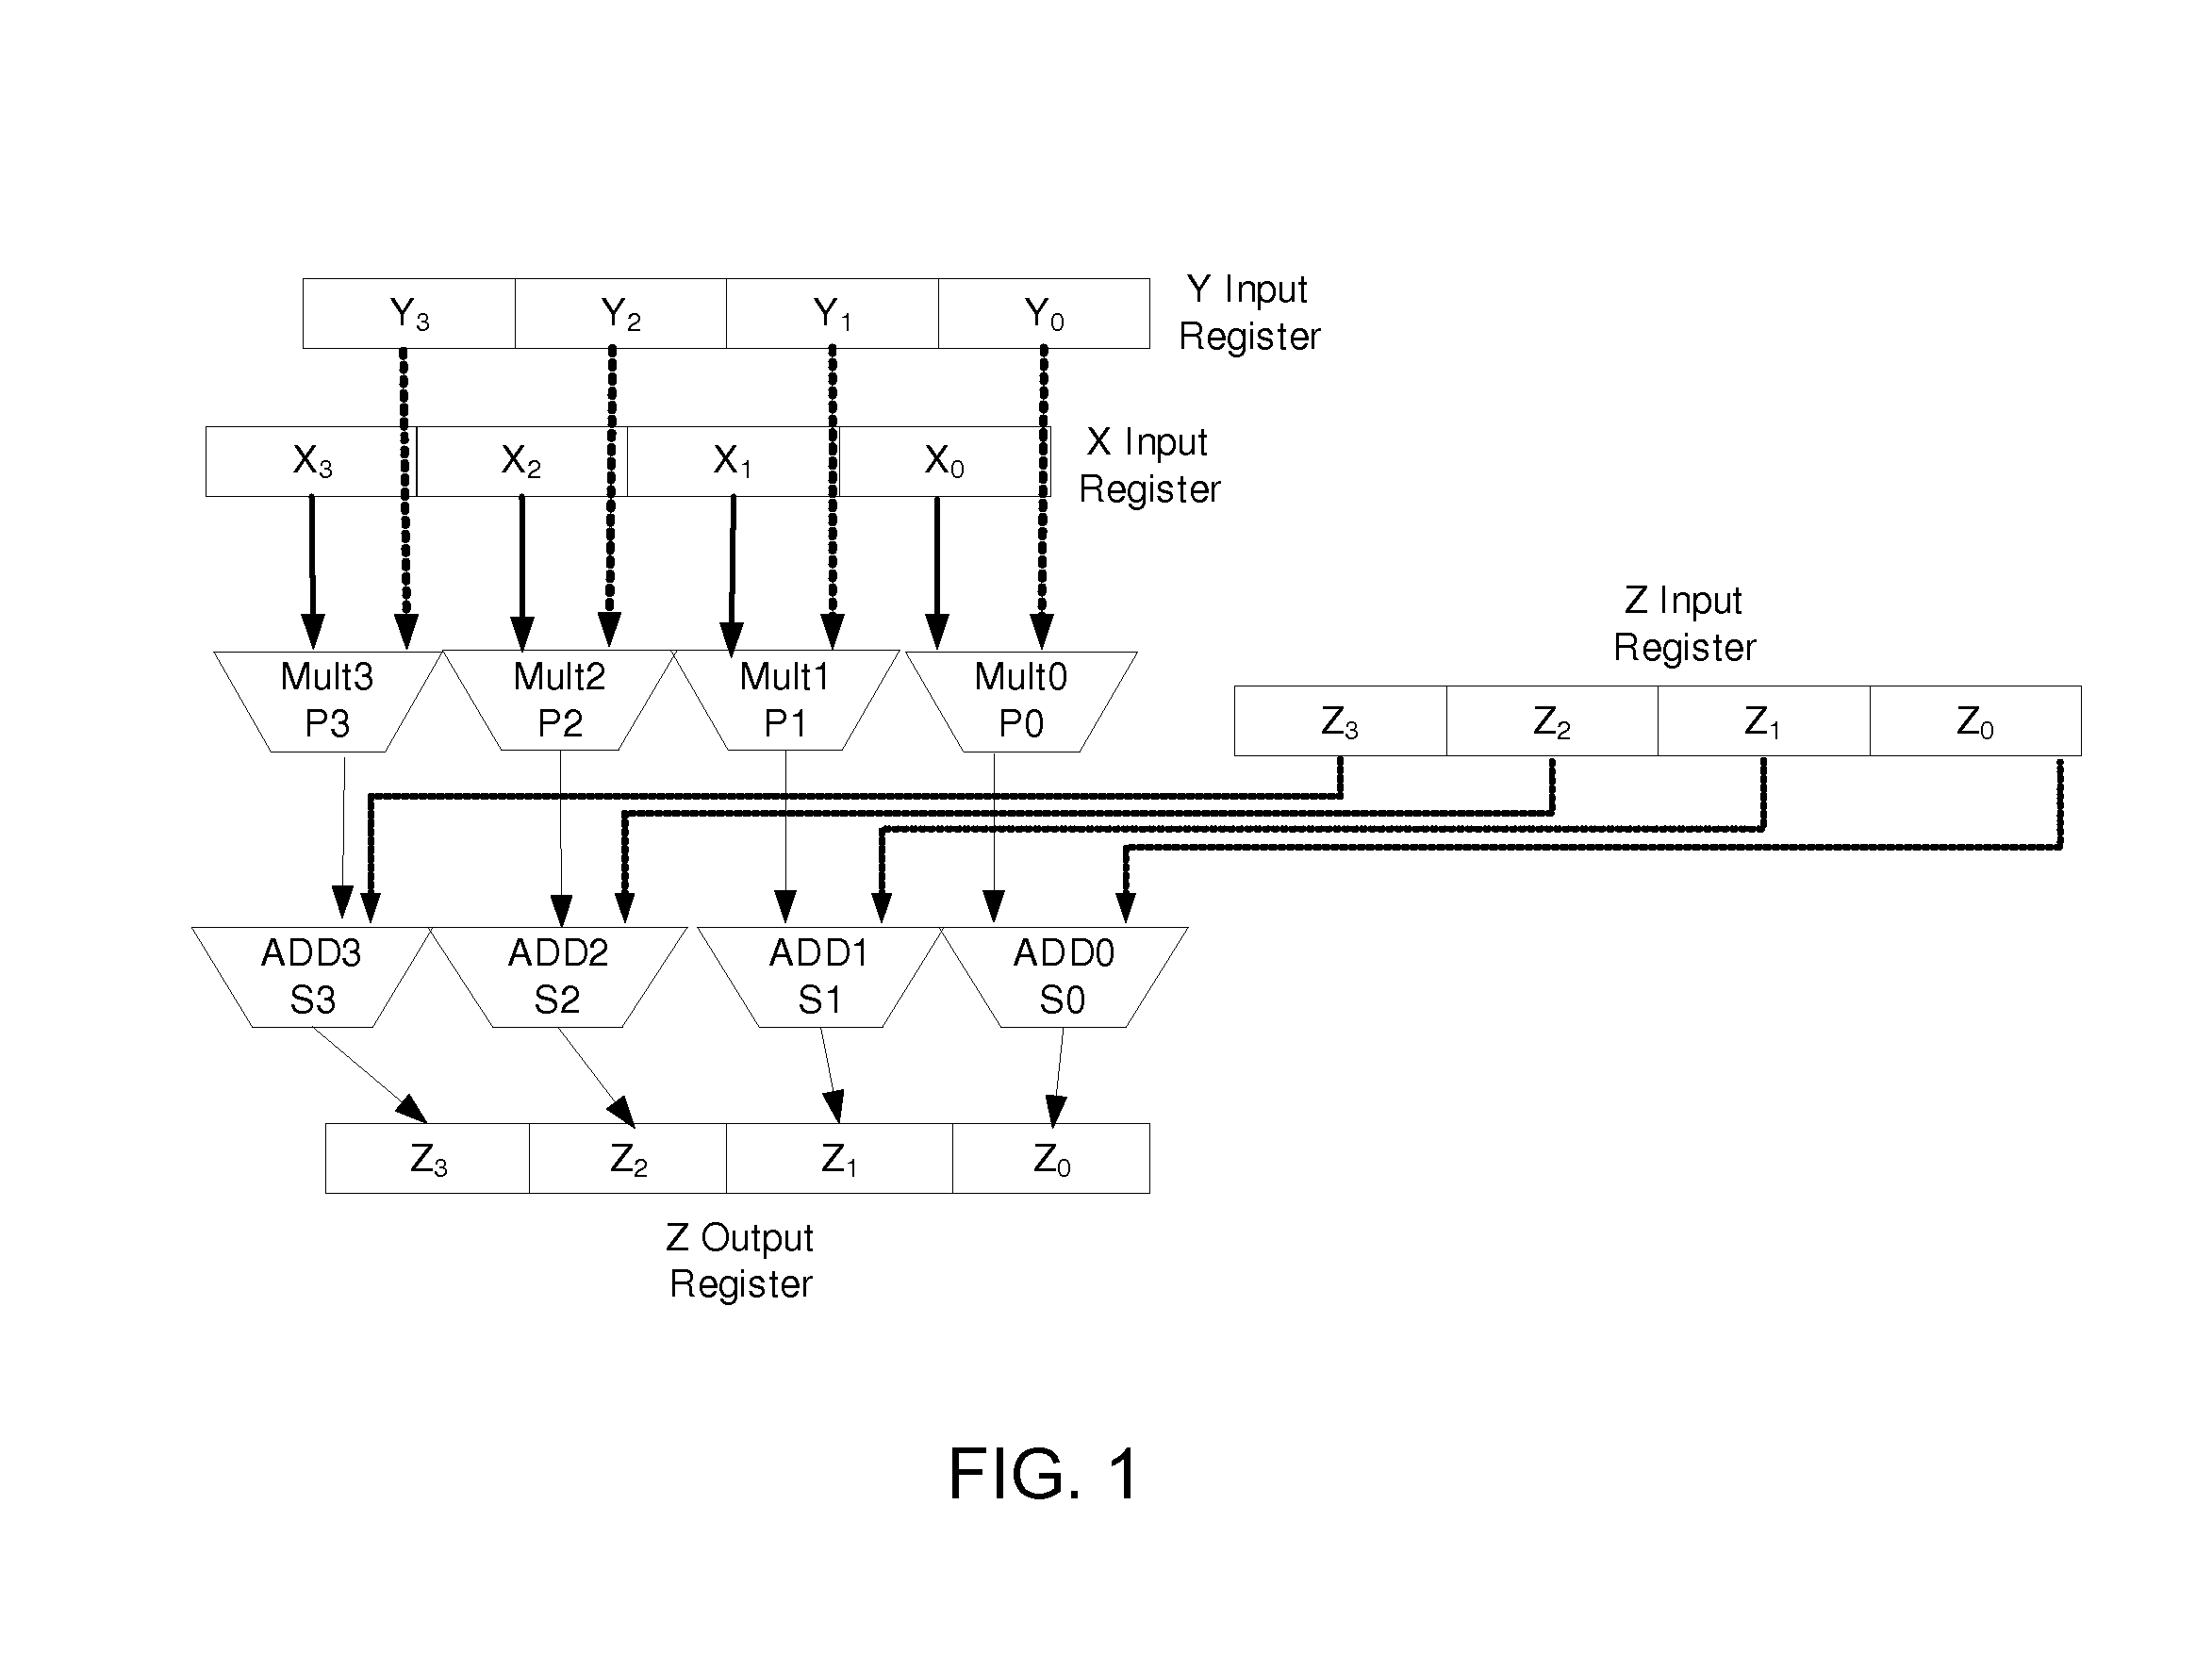 Multi-function floating point unit